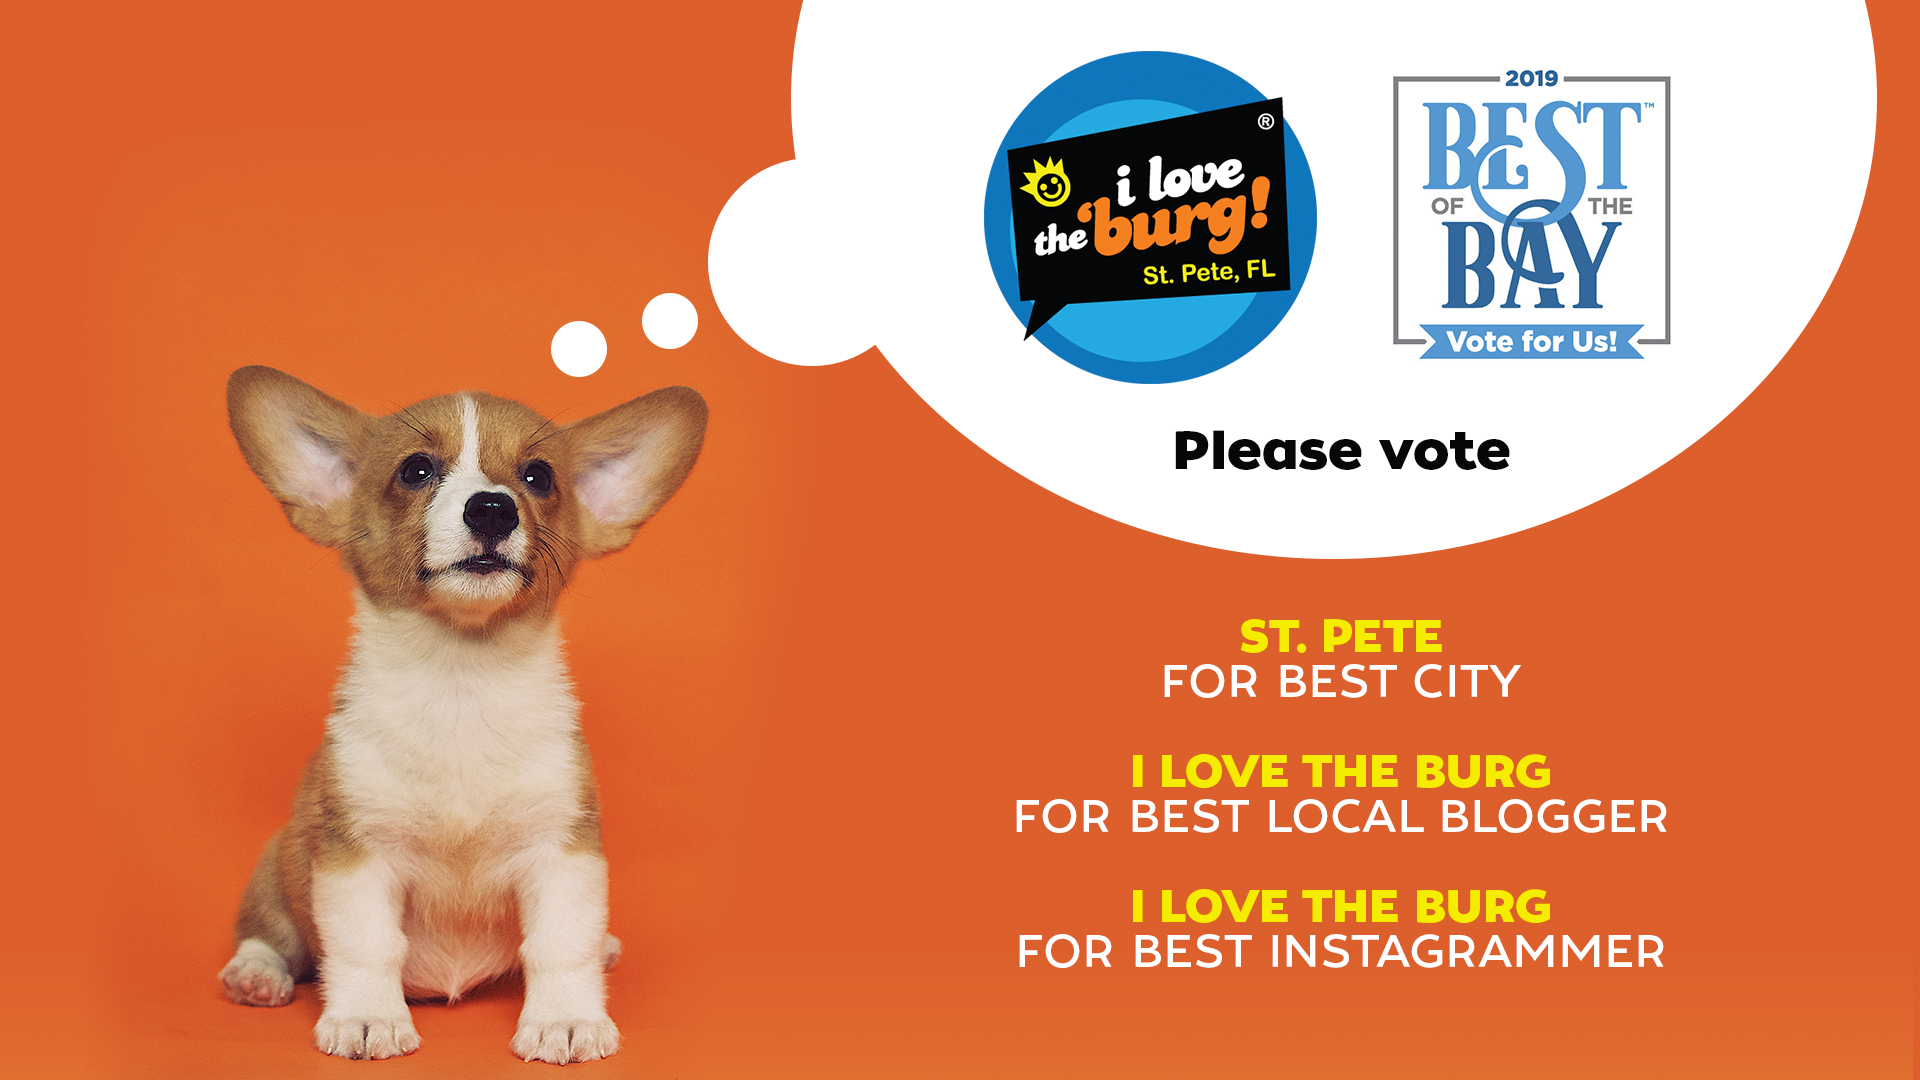 A corgi puppy on an orange background asking you to please vote for us